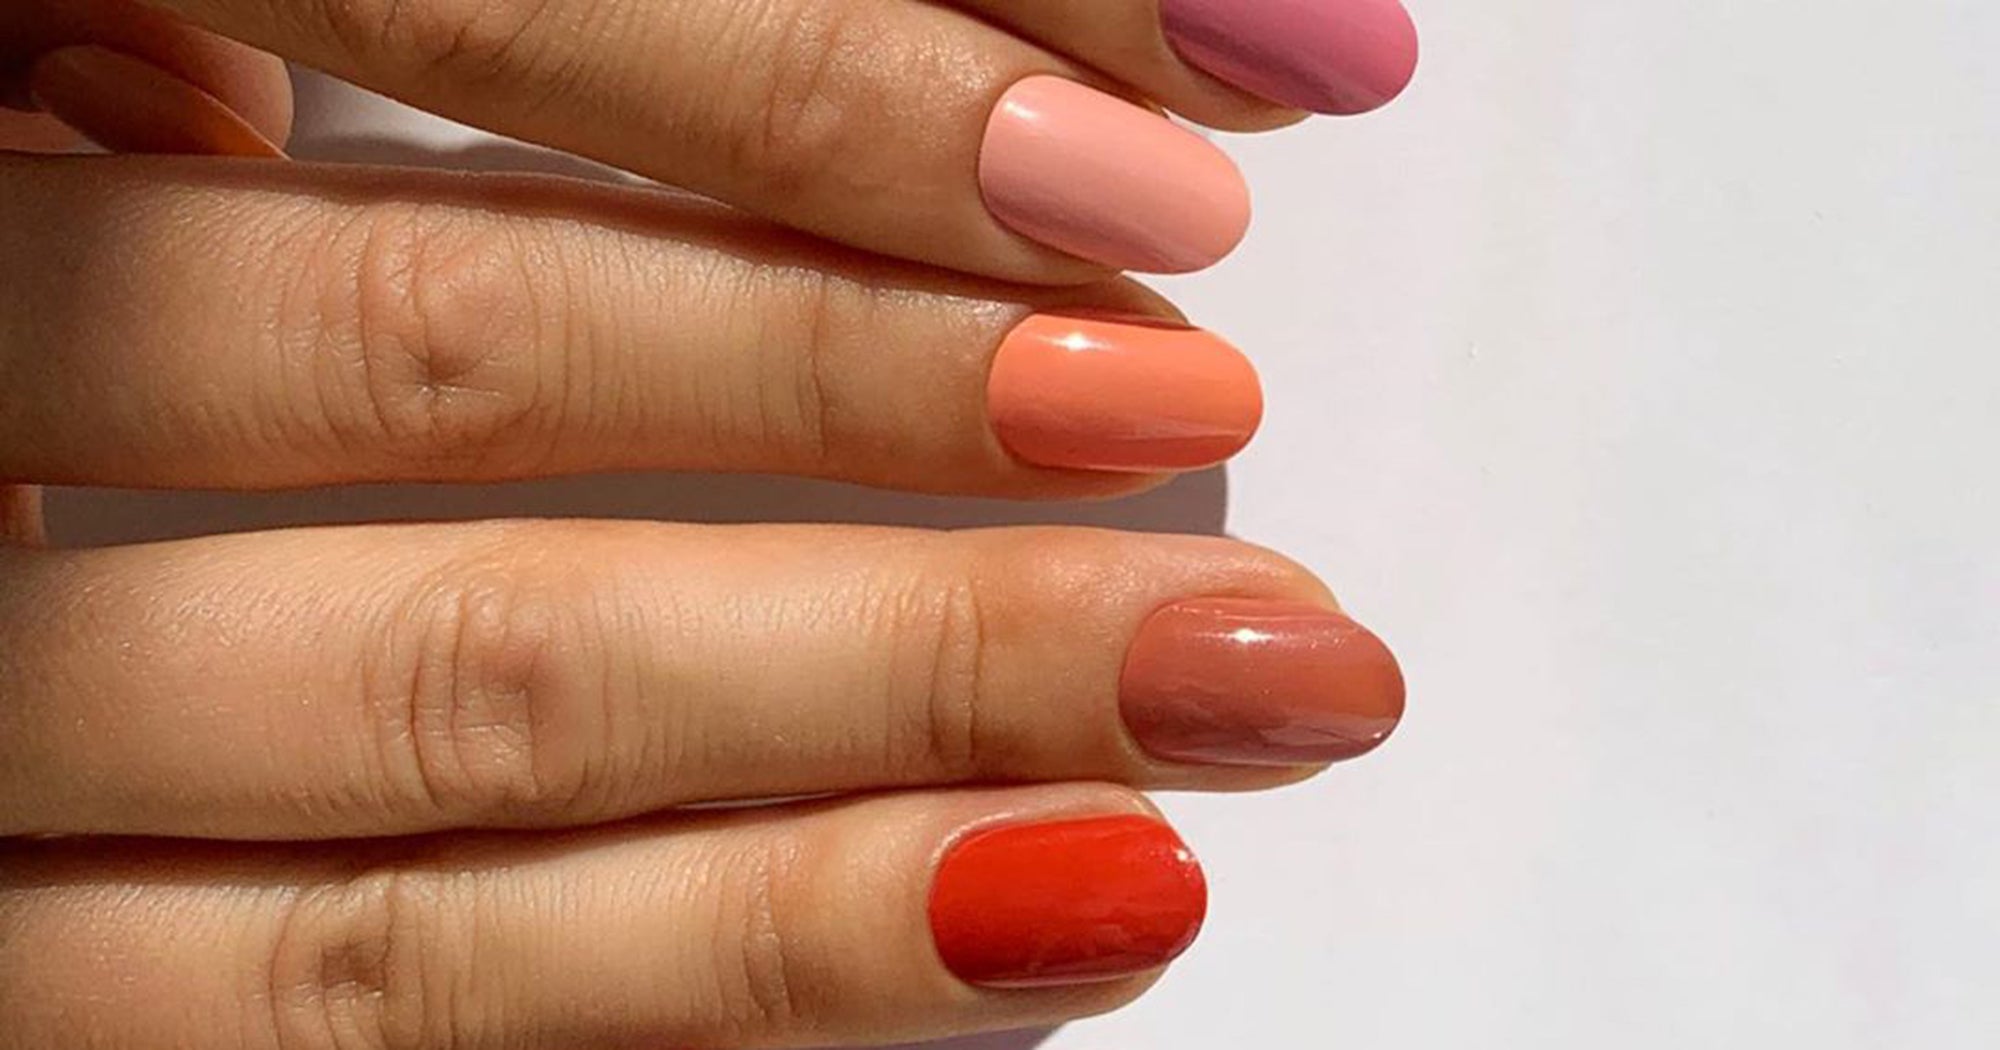 2. "Tangerine Nail Polish for Summer" - wide 6